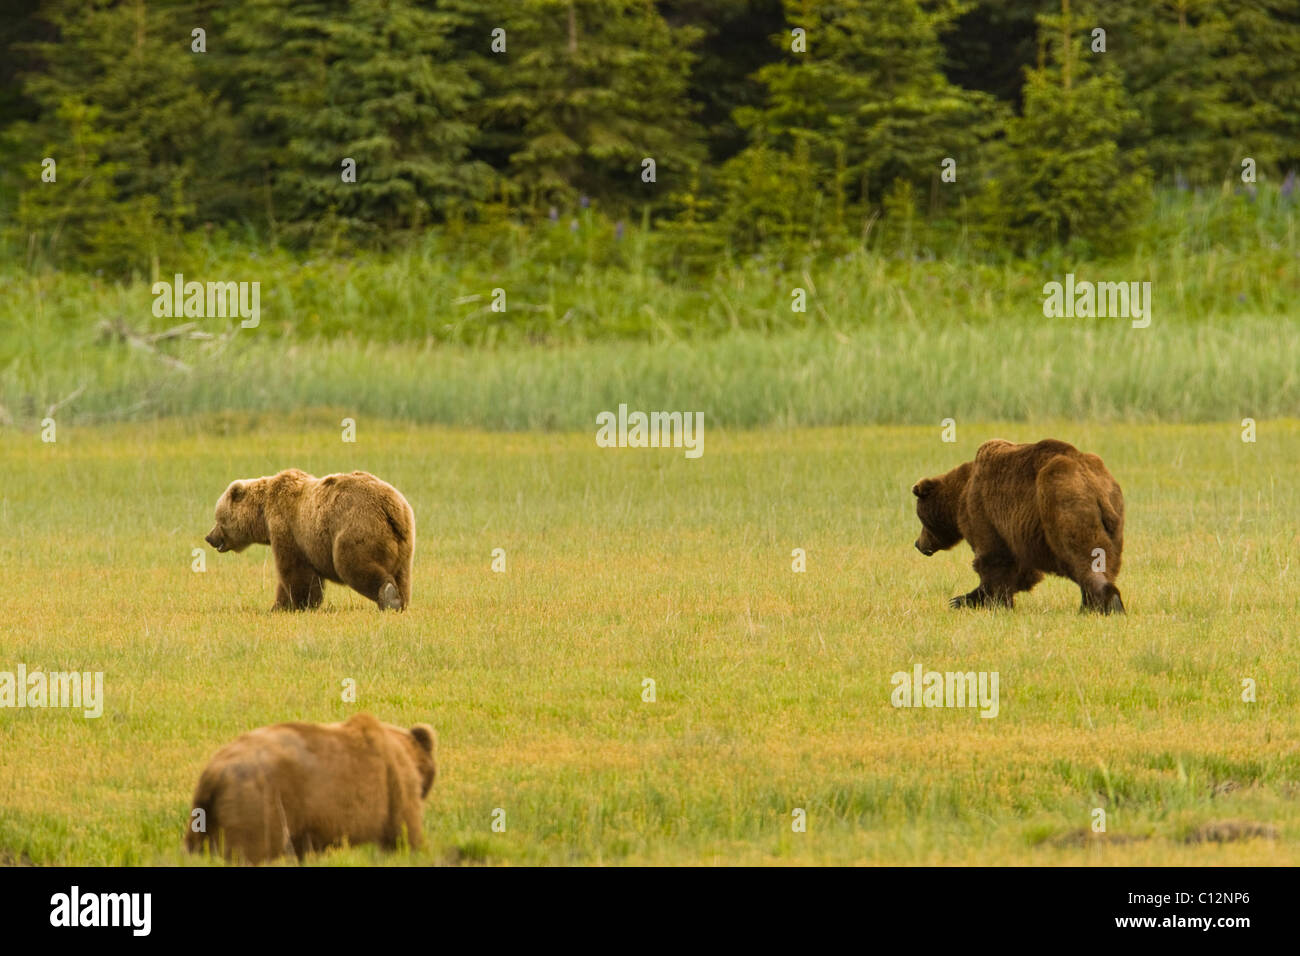 Two male grizzly bears vie for the attention of a female during mating season. Stock Photo